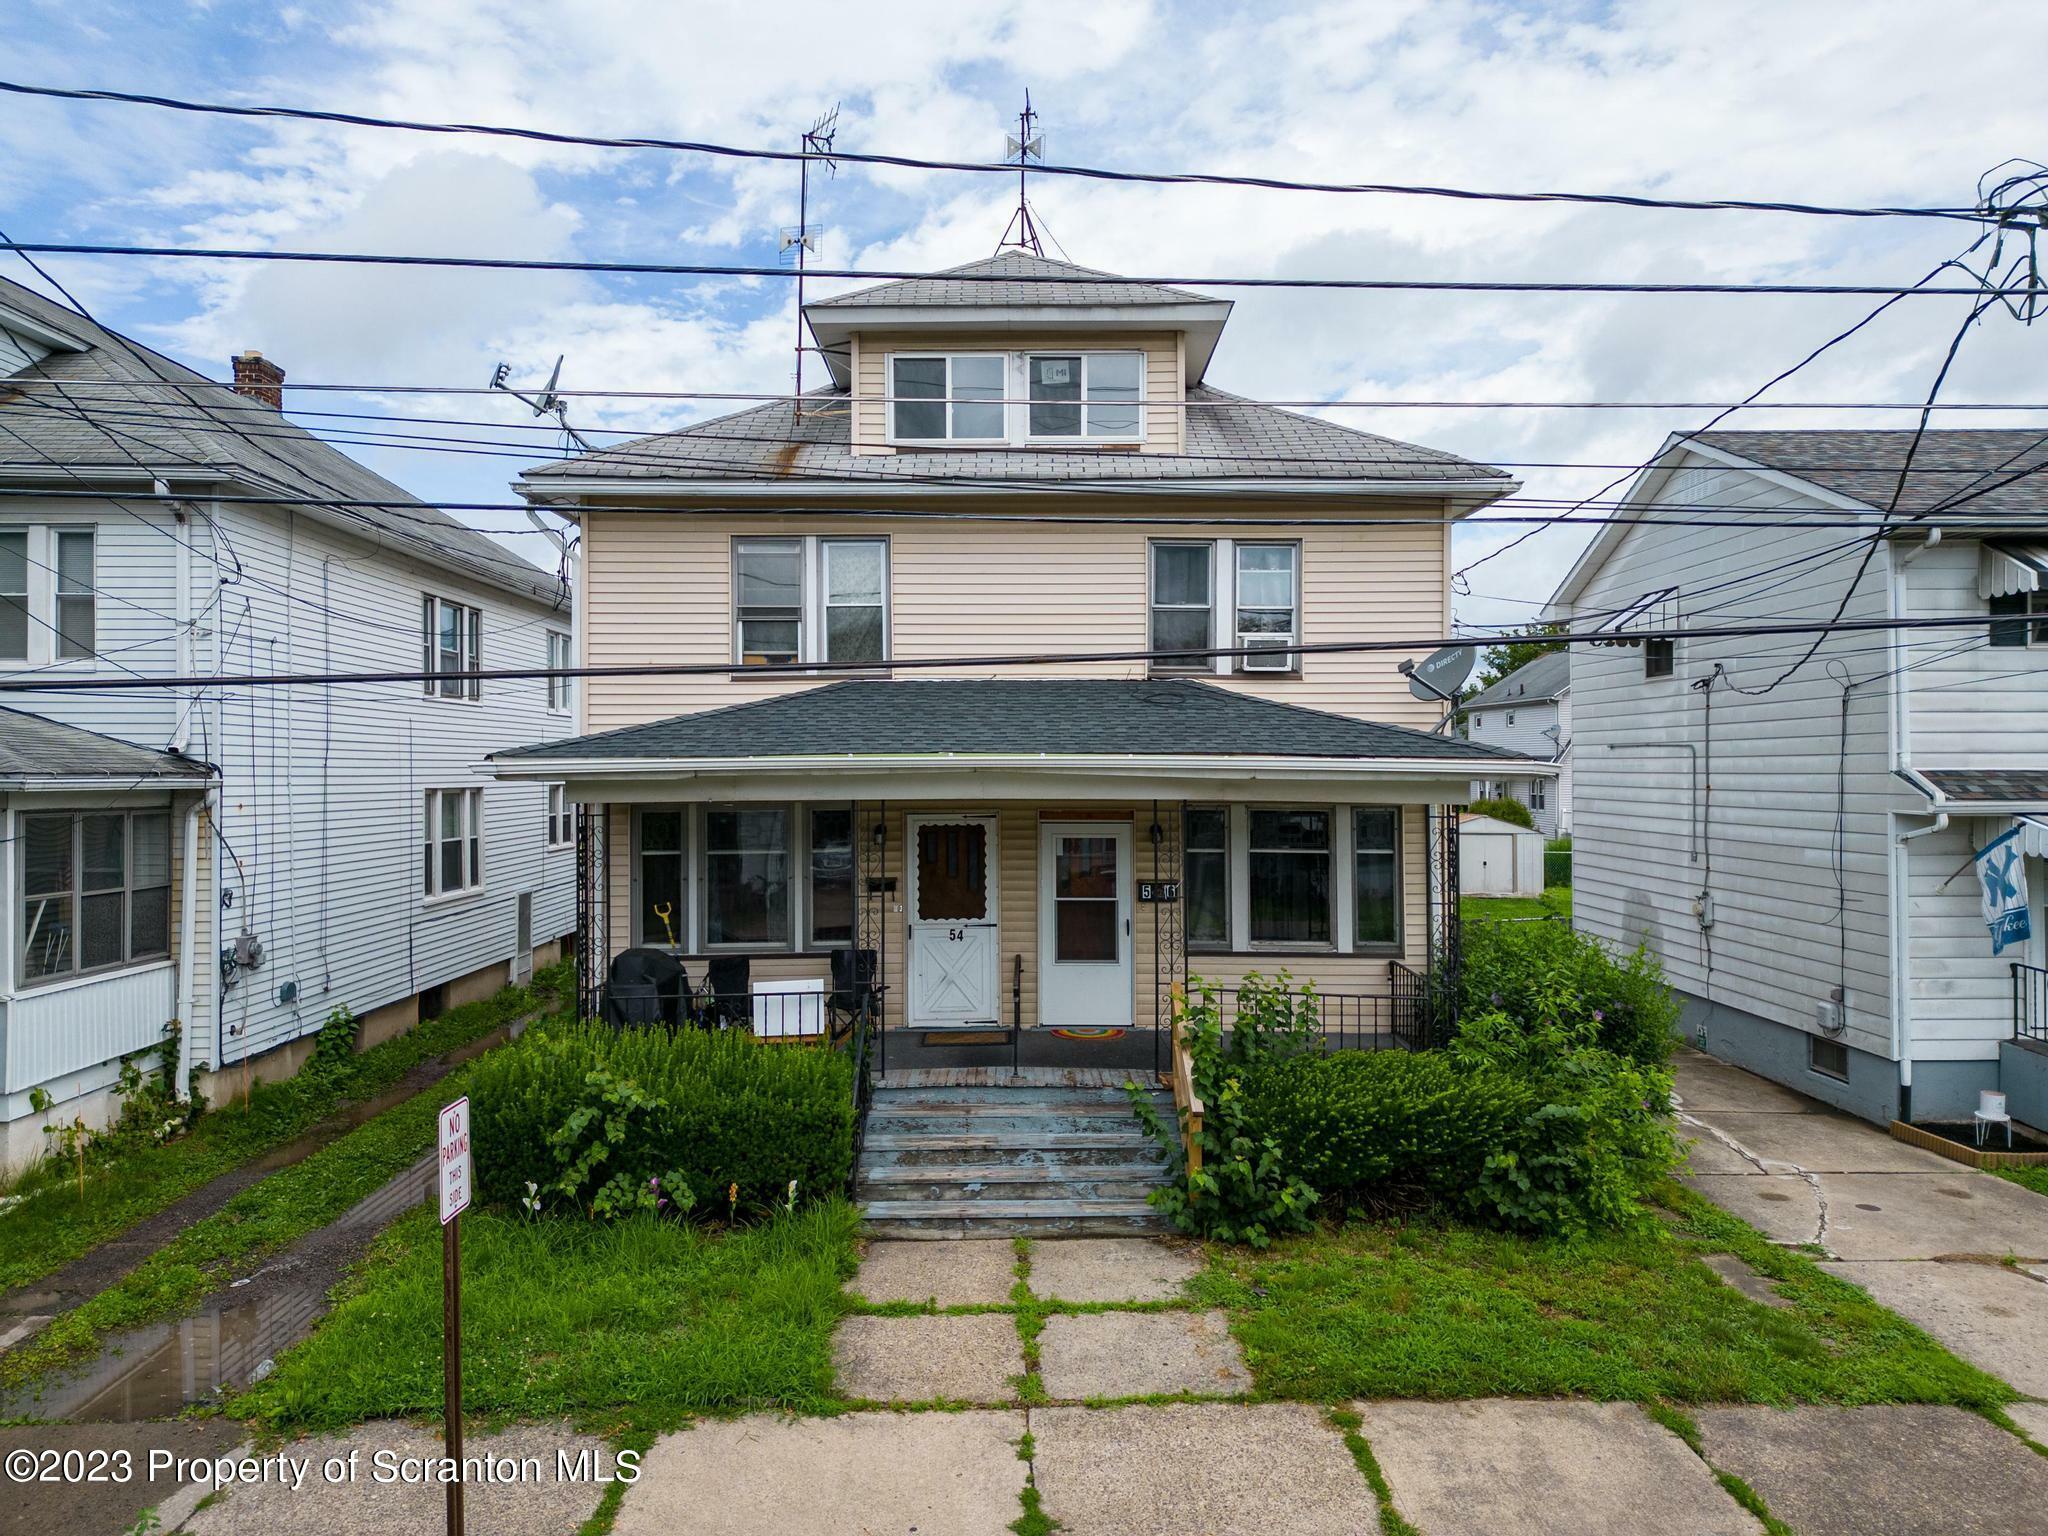 Property Photo:  54 - 56 N Welles Ave.  PA 18704 